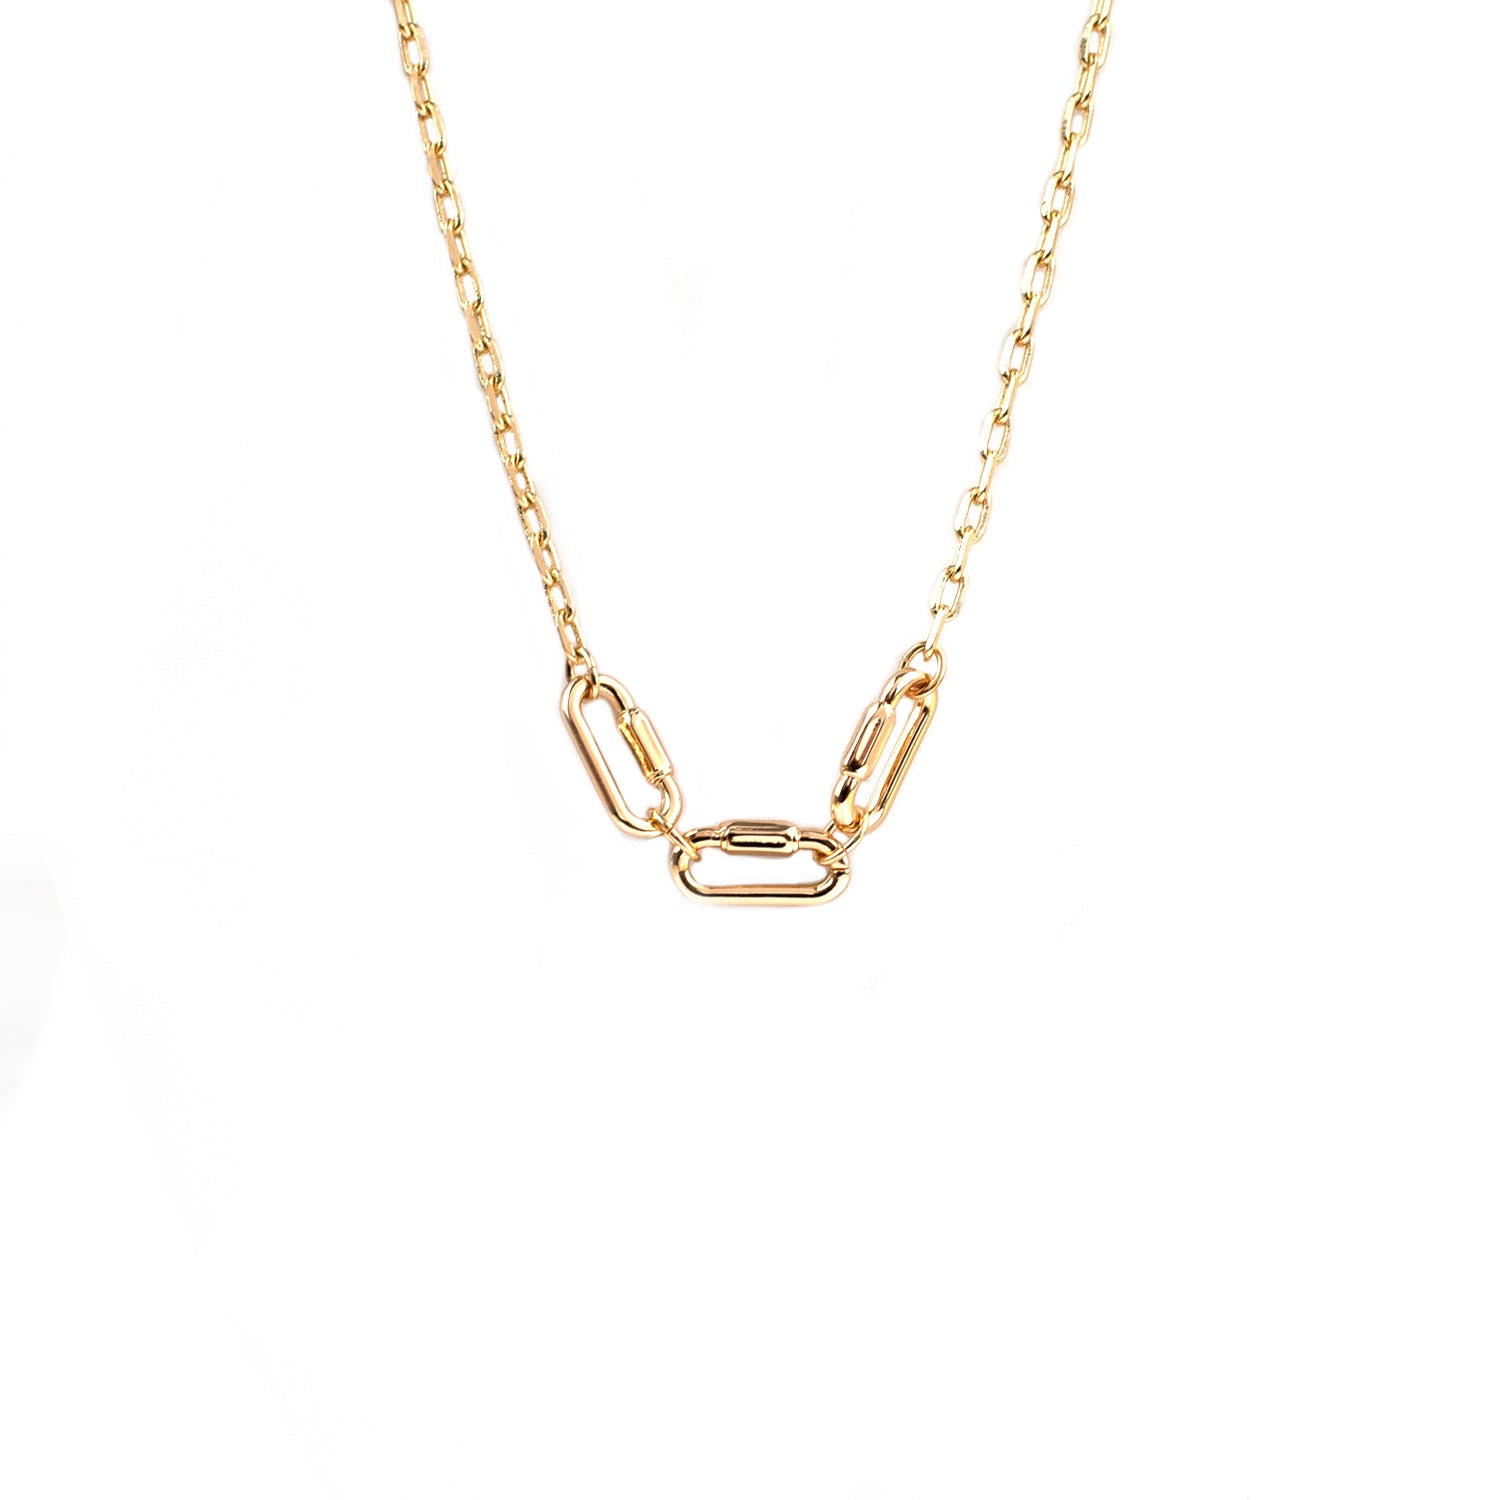 14K Yellow Gold Large Open Link Chain with Diamond Carabiner Necklace, 16